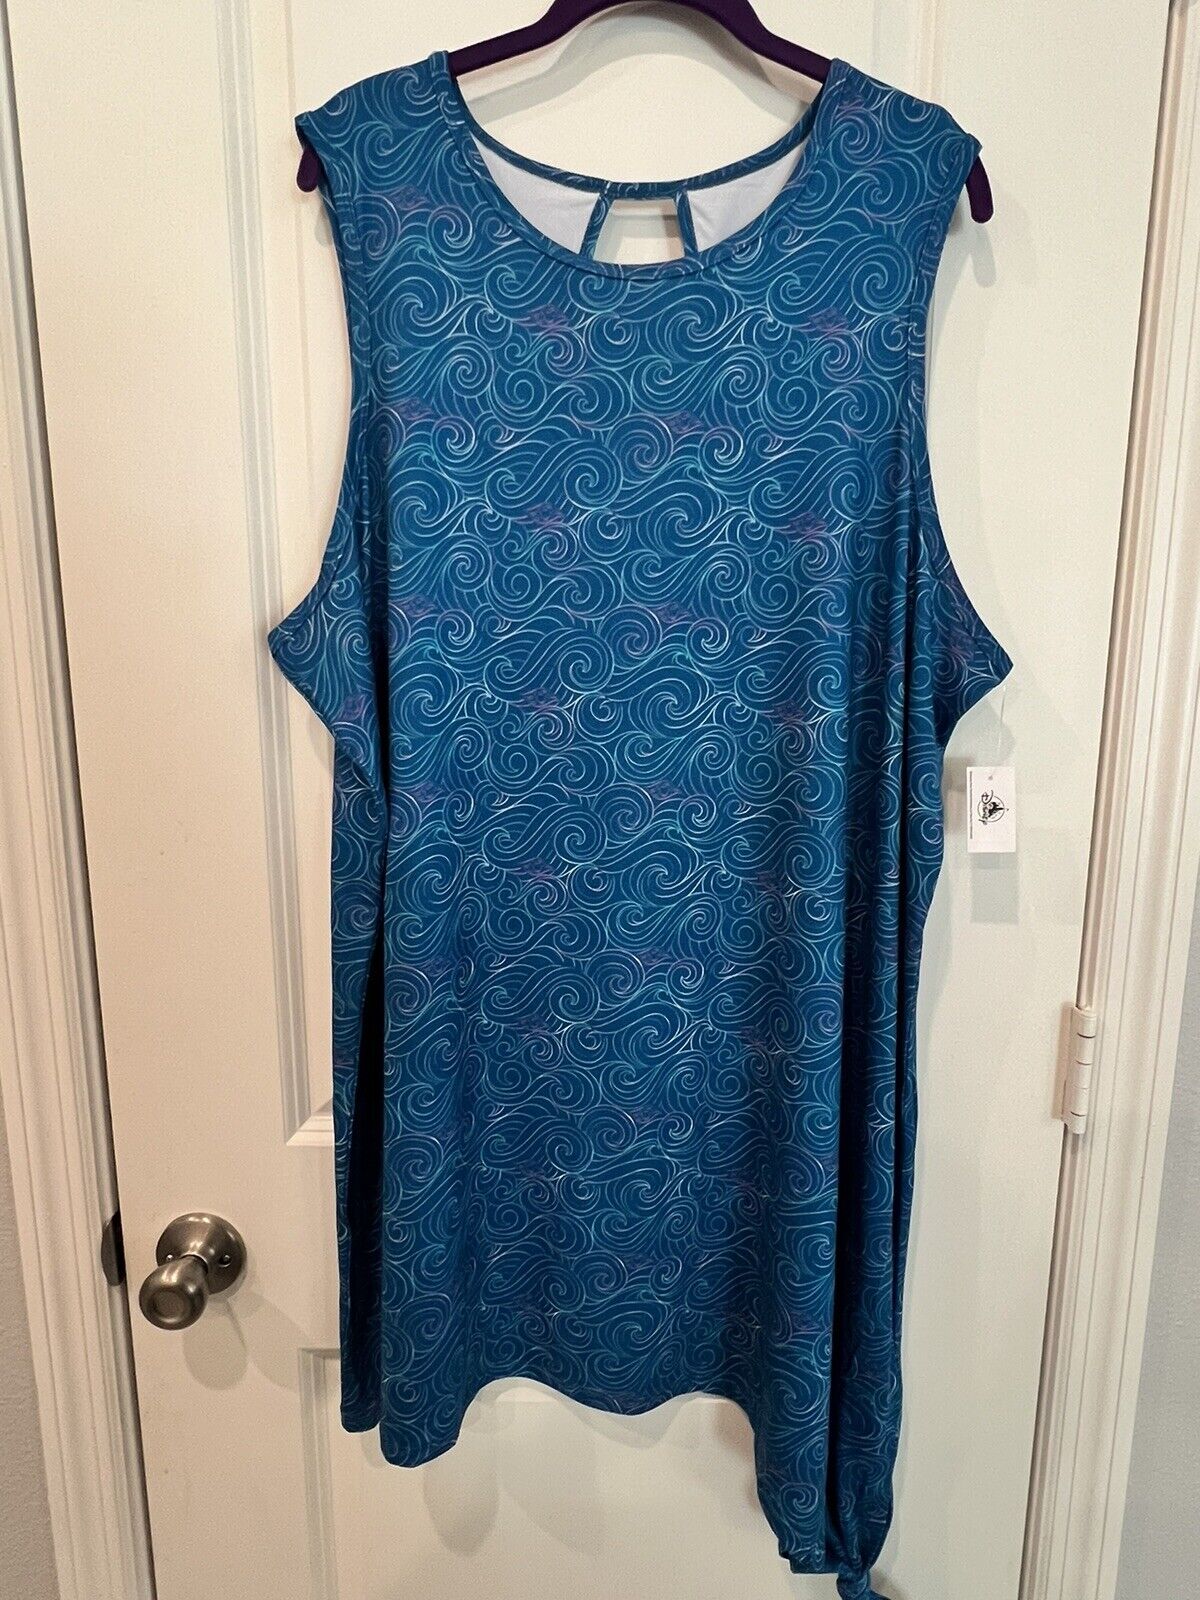 Disney Cruise Line DCL Blue Dress Cover Up Swim Size 1X New